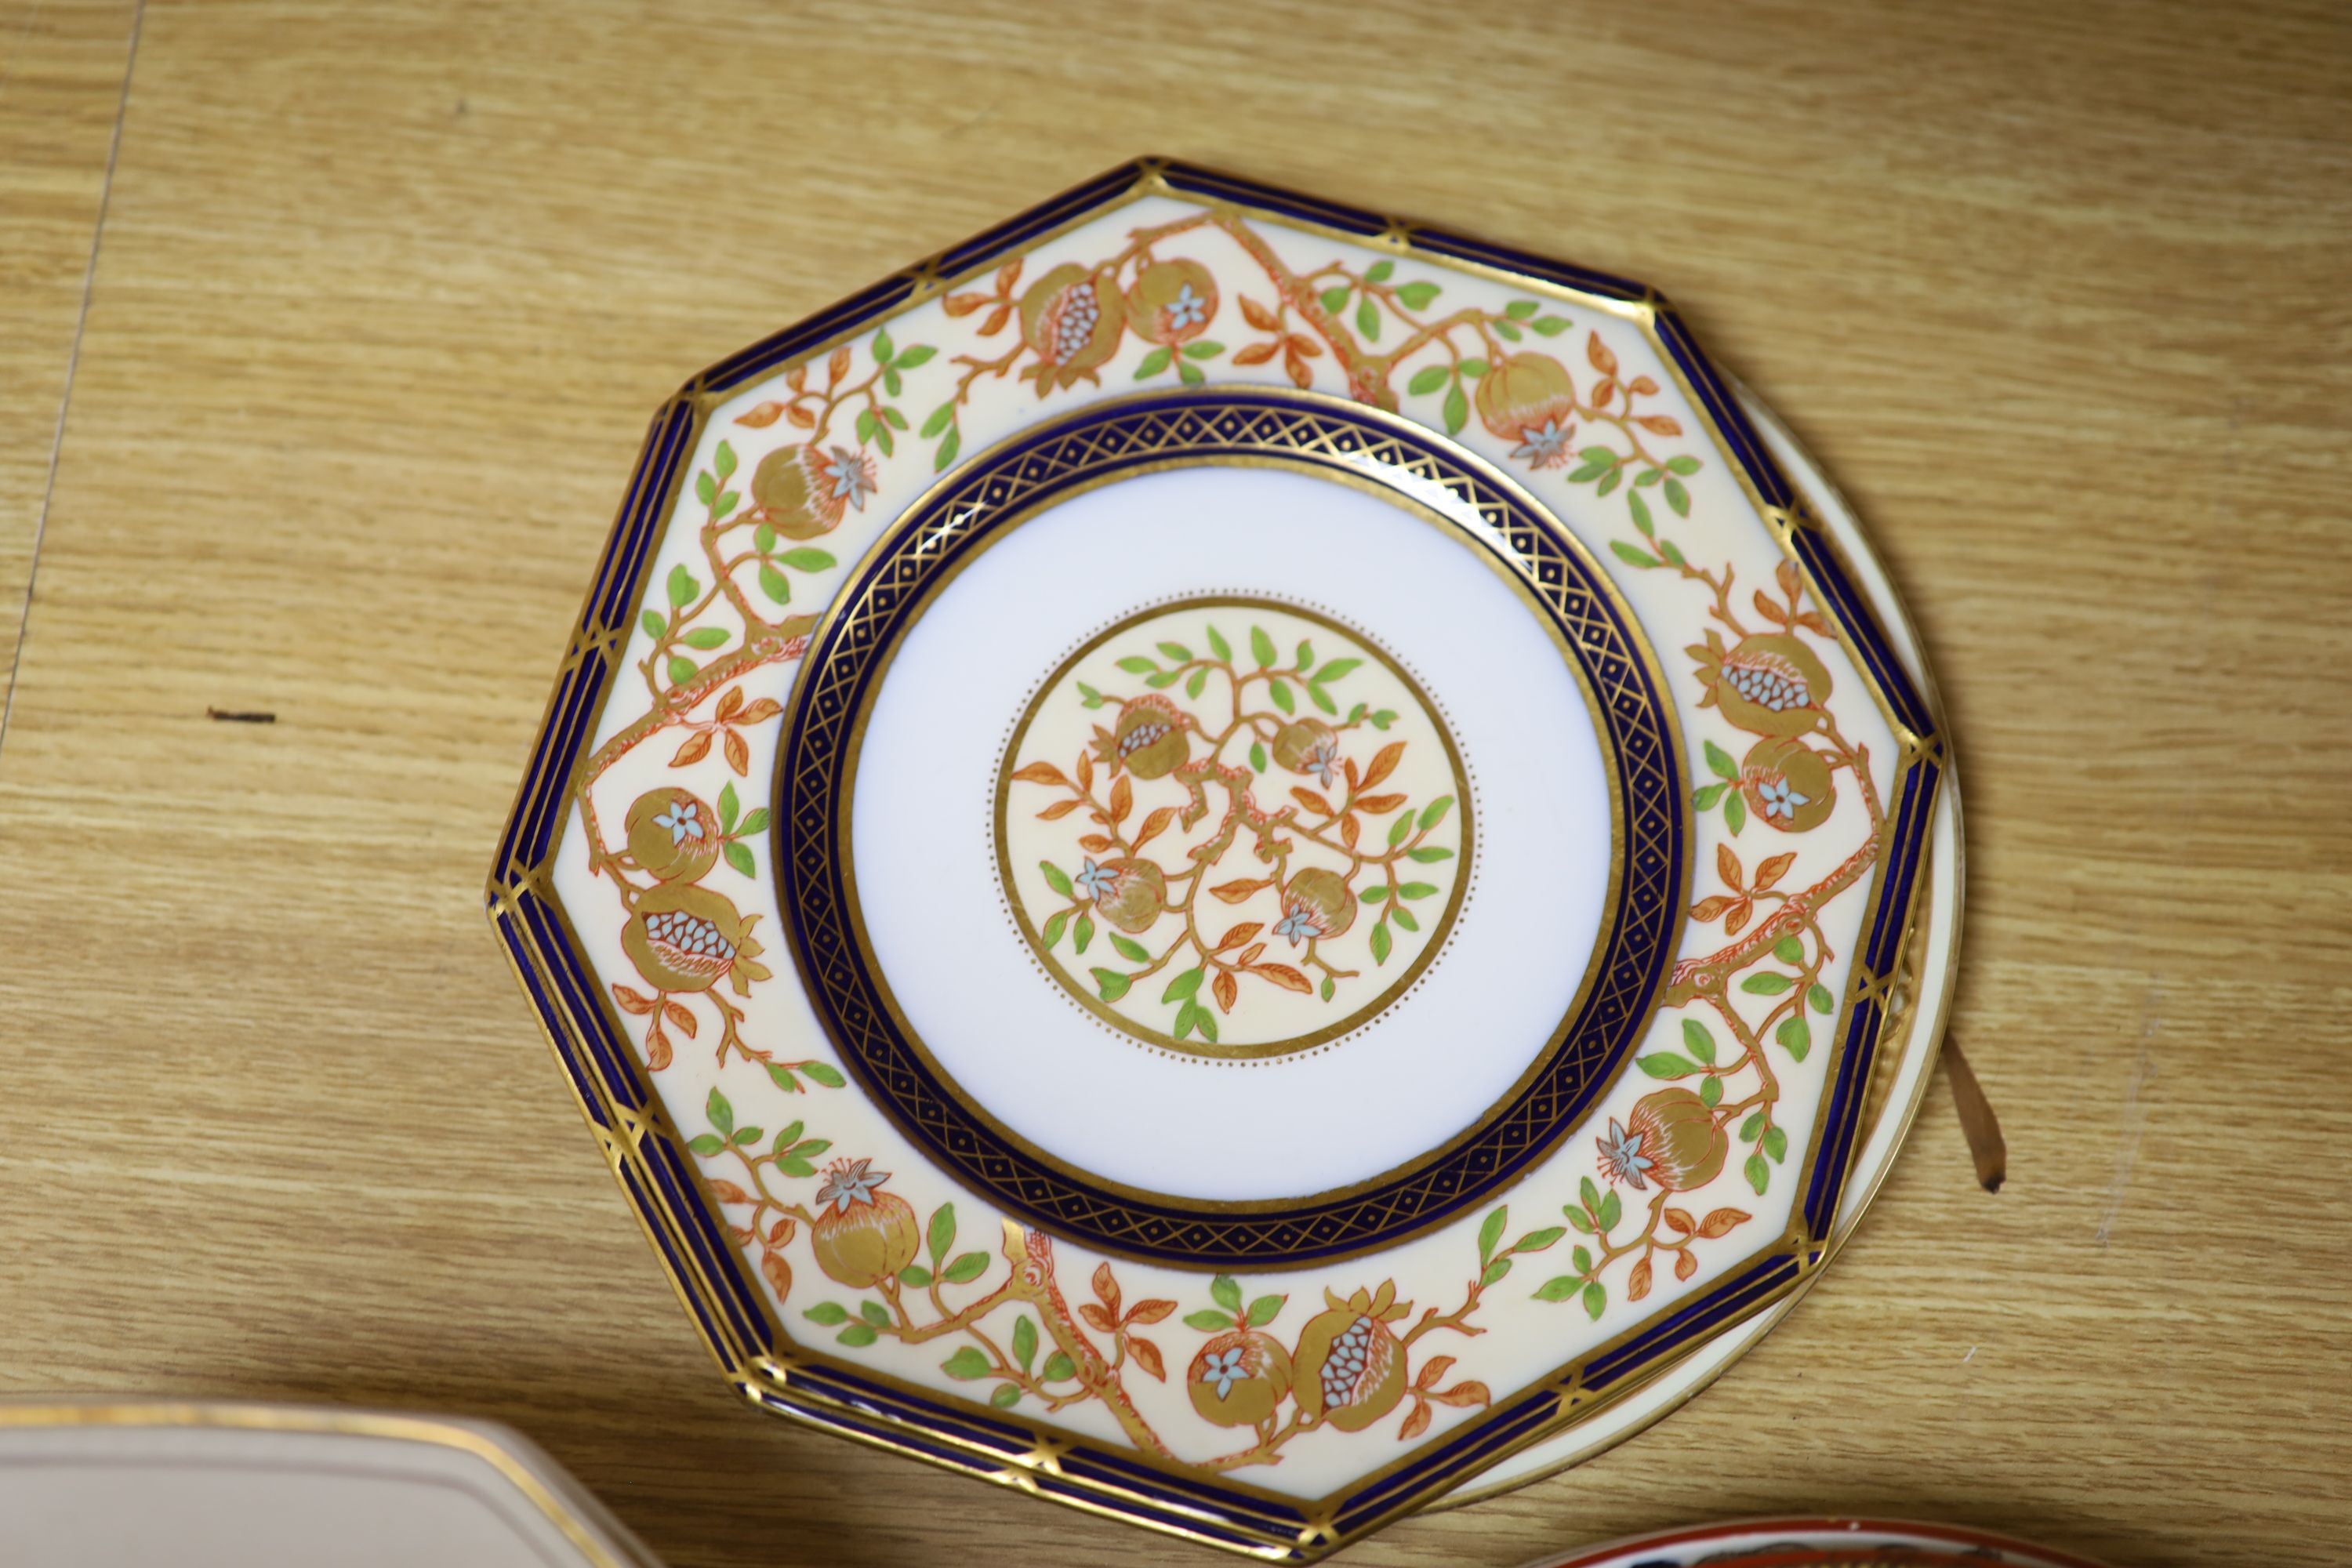 A group of 19th century Wedgwood bone china, creamware and stone china plates and dishes (17) - Image 4 of 4